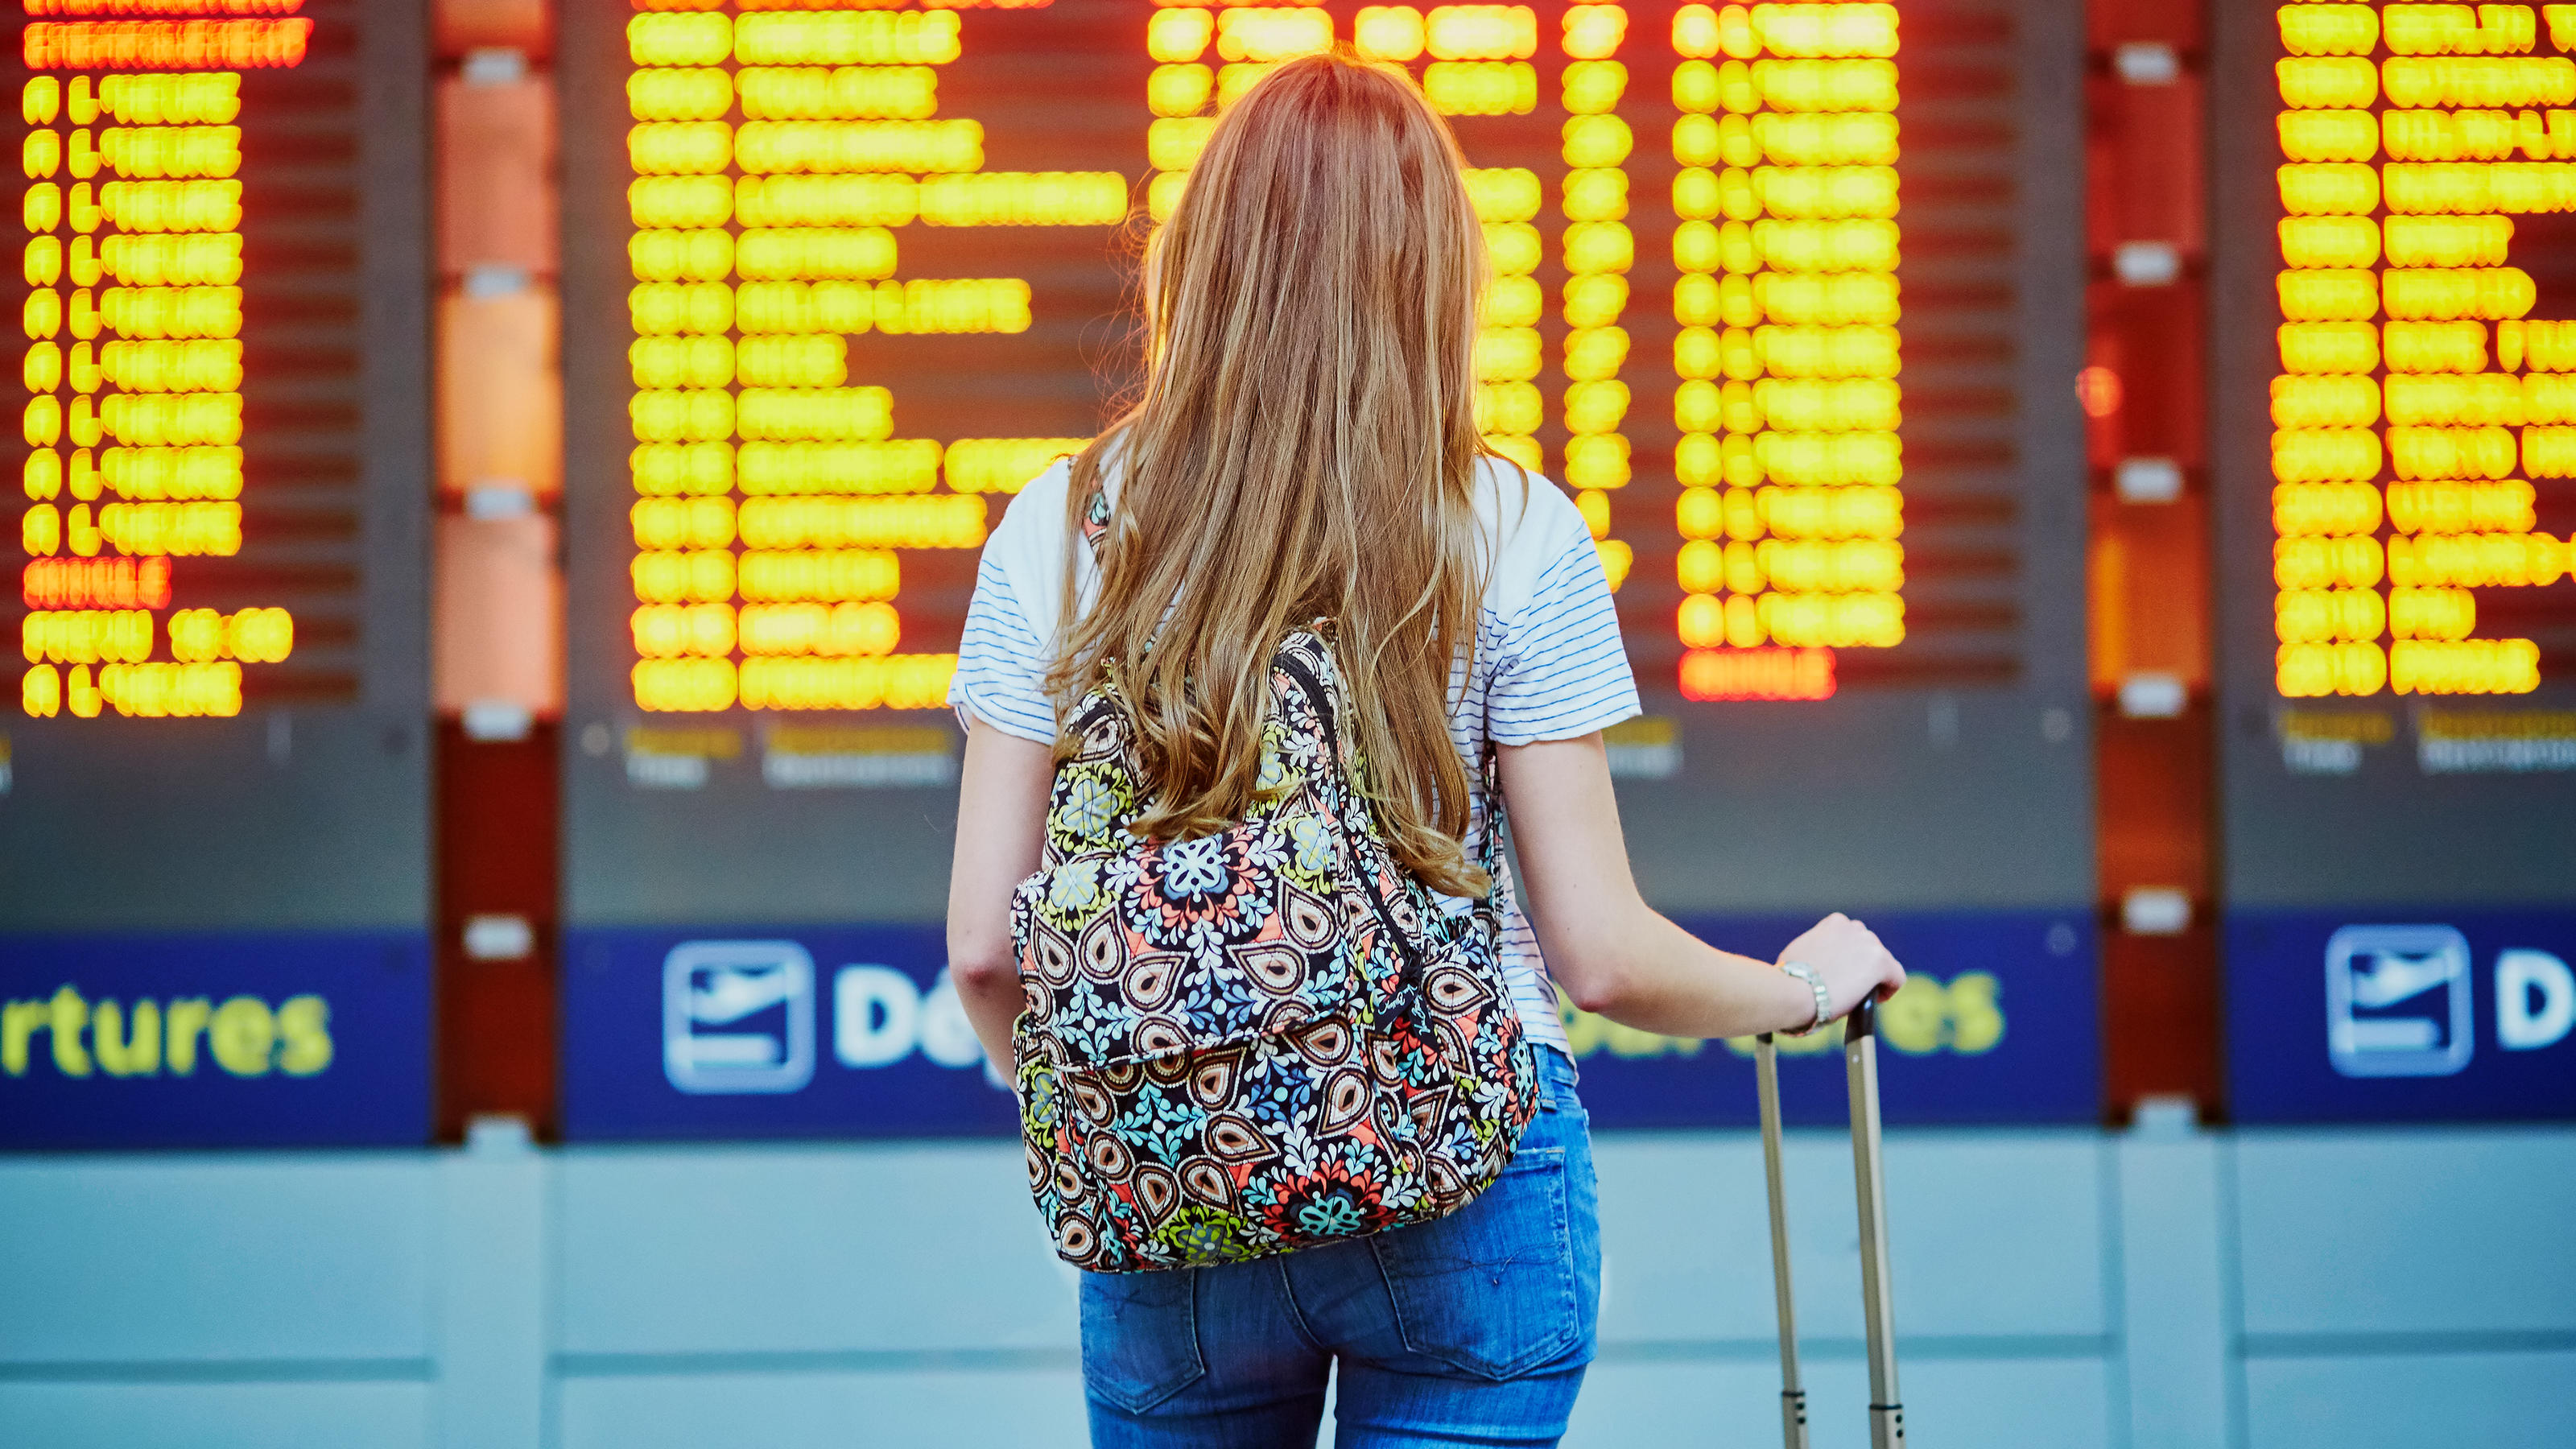 Beautiful young tourist girl with backpack and carry on luggage in international airport, near flight information board